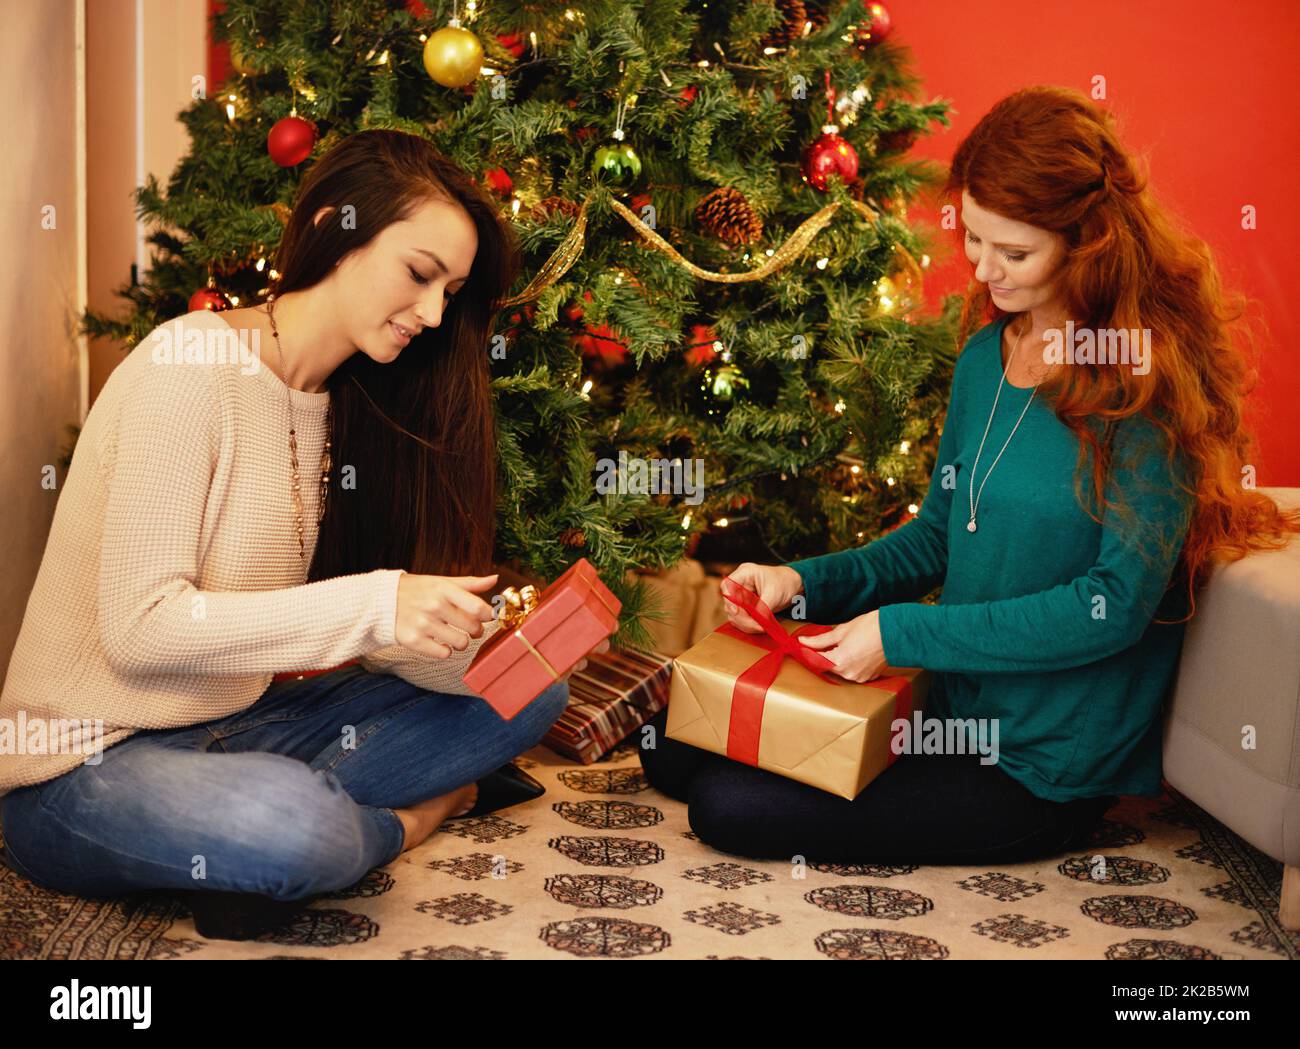 Theyre starting on the presents. two young women sitting by a christmas tree and opening their presents. Stock Photo